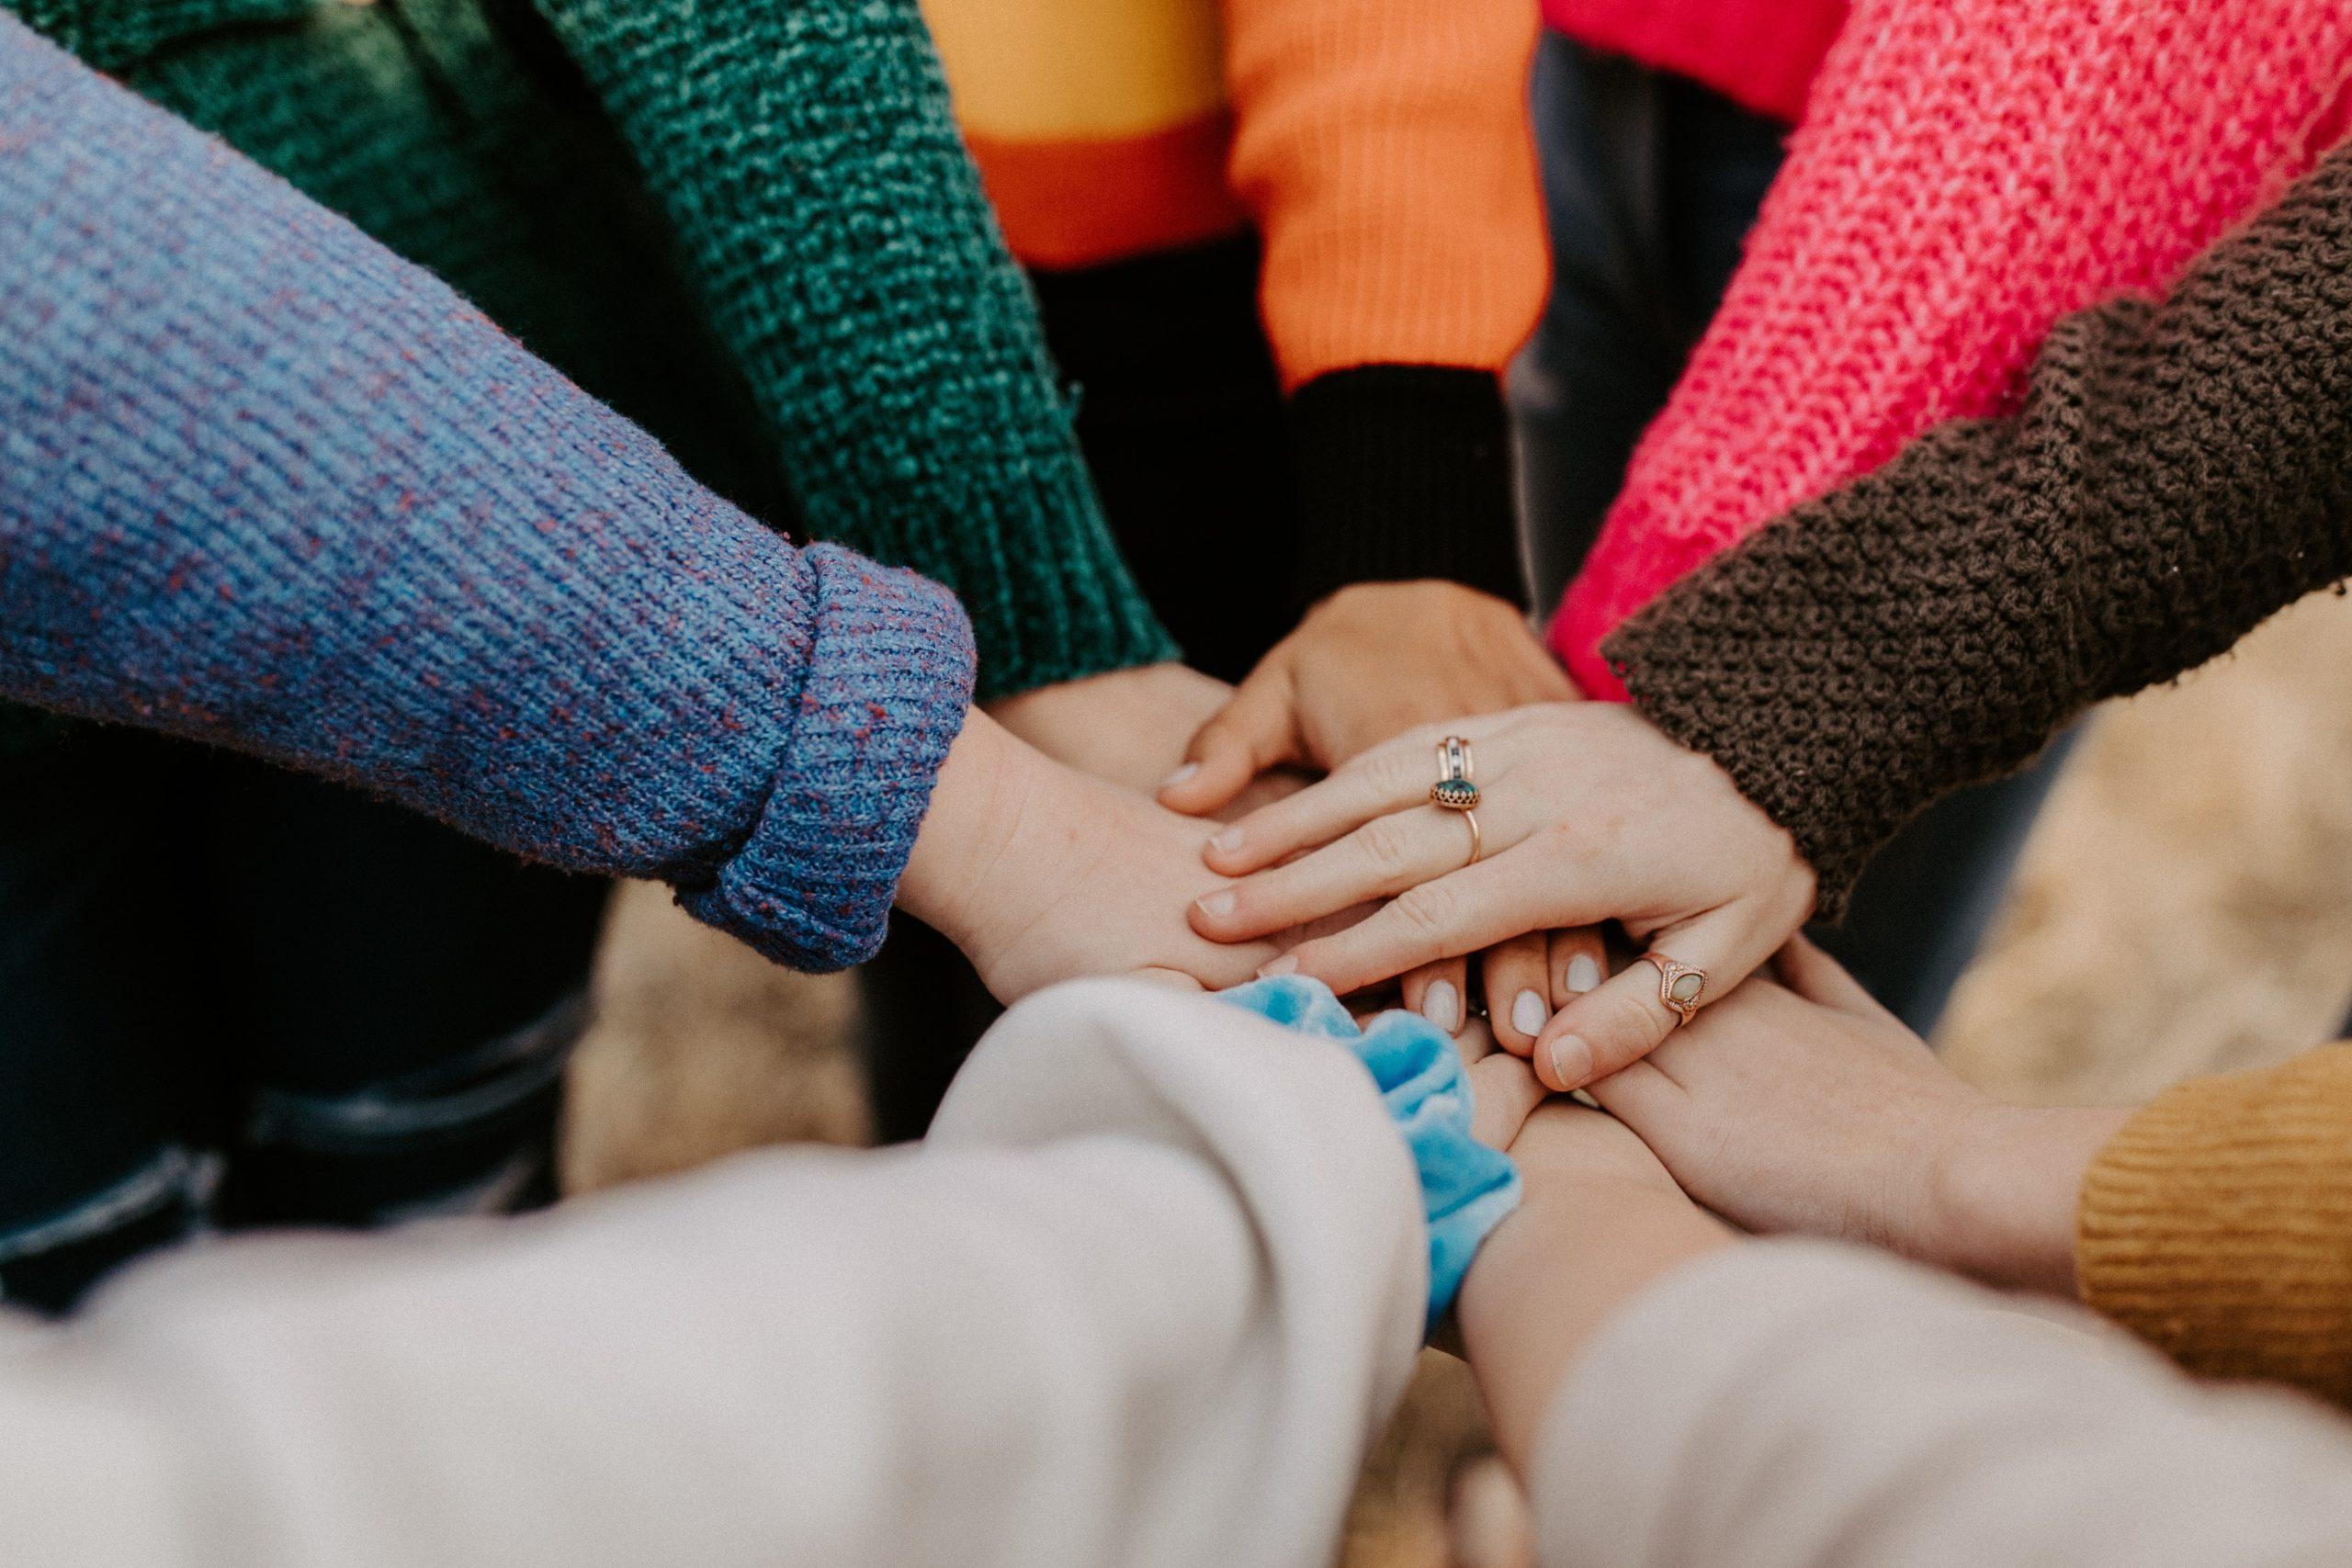 A group of people putting their hands together in a huddle